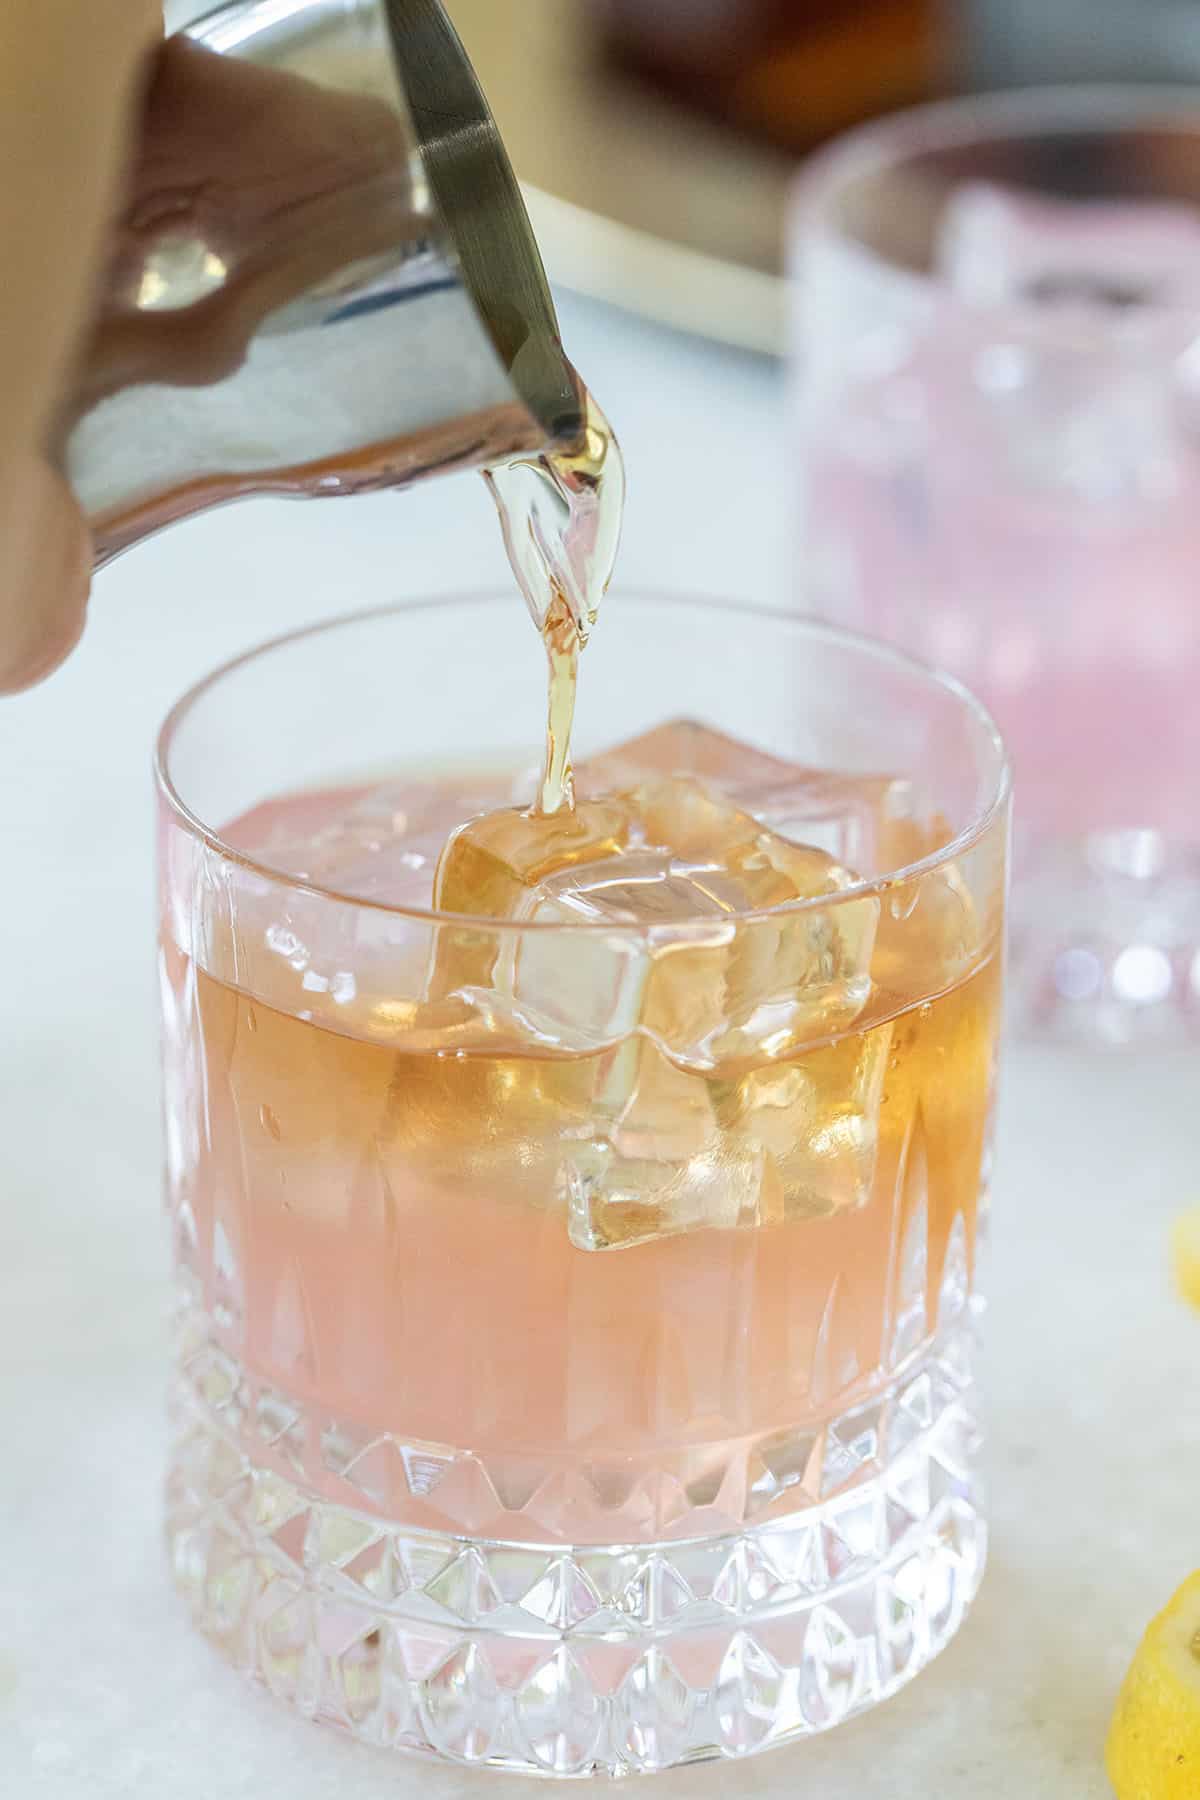 brown spirit being poured over ice in a cocktail glass